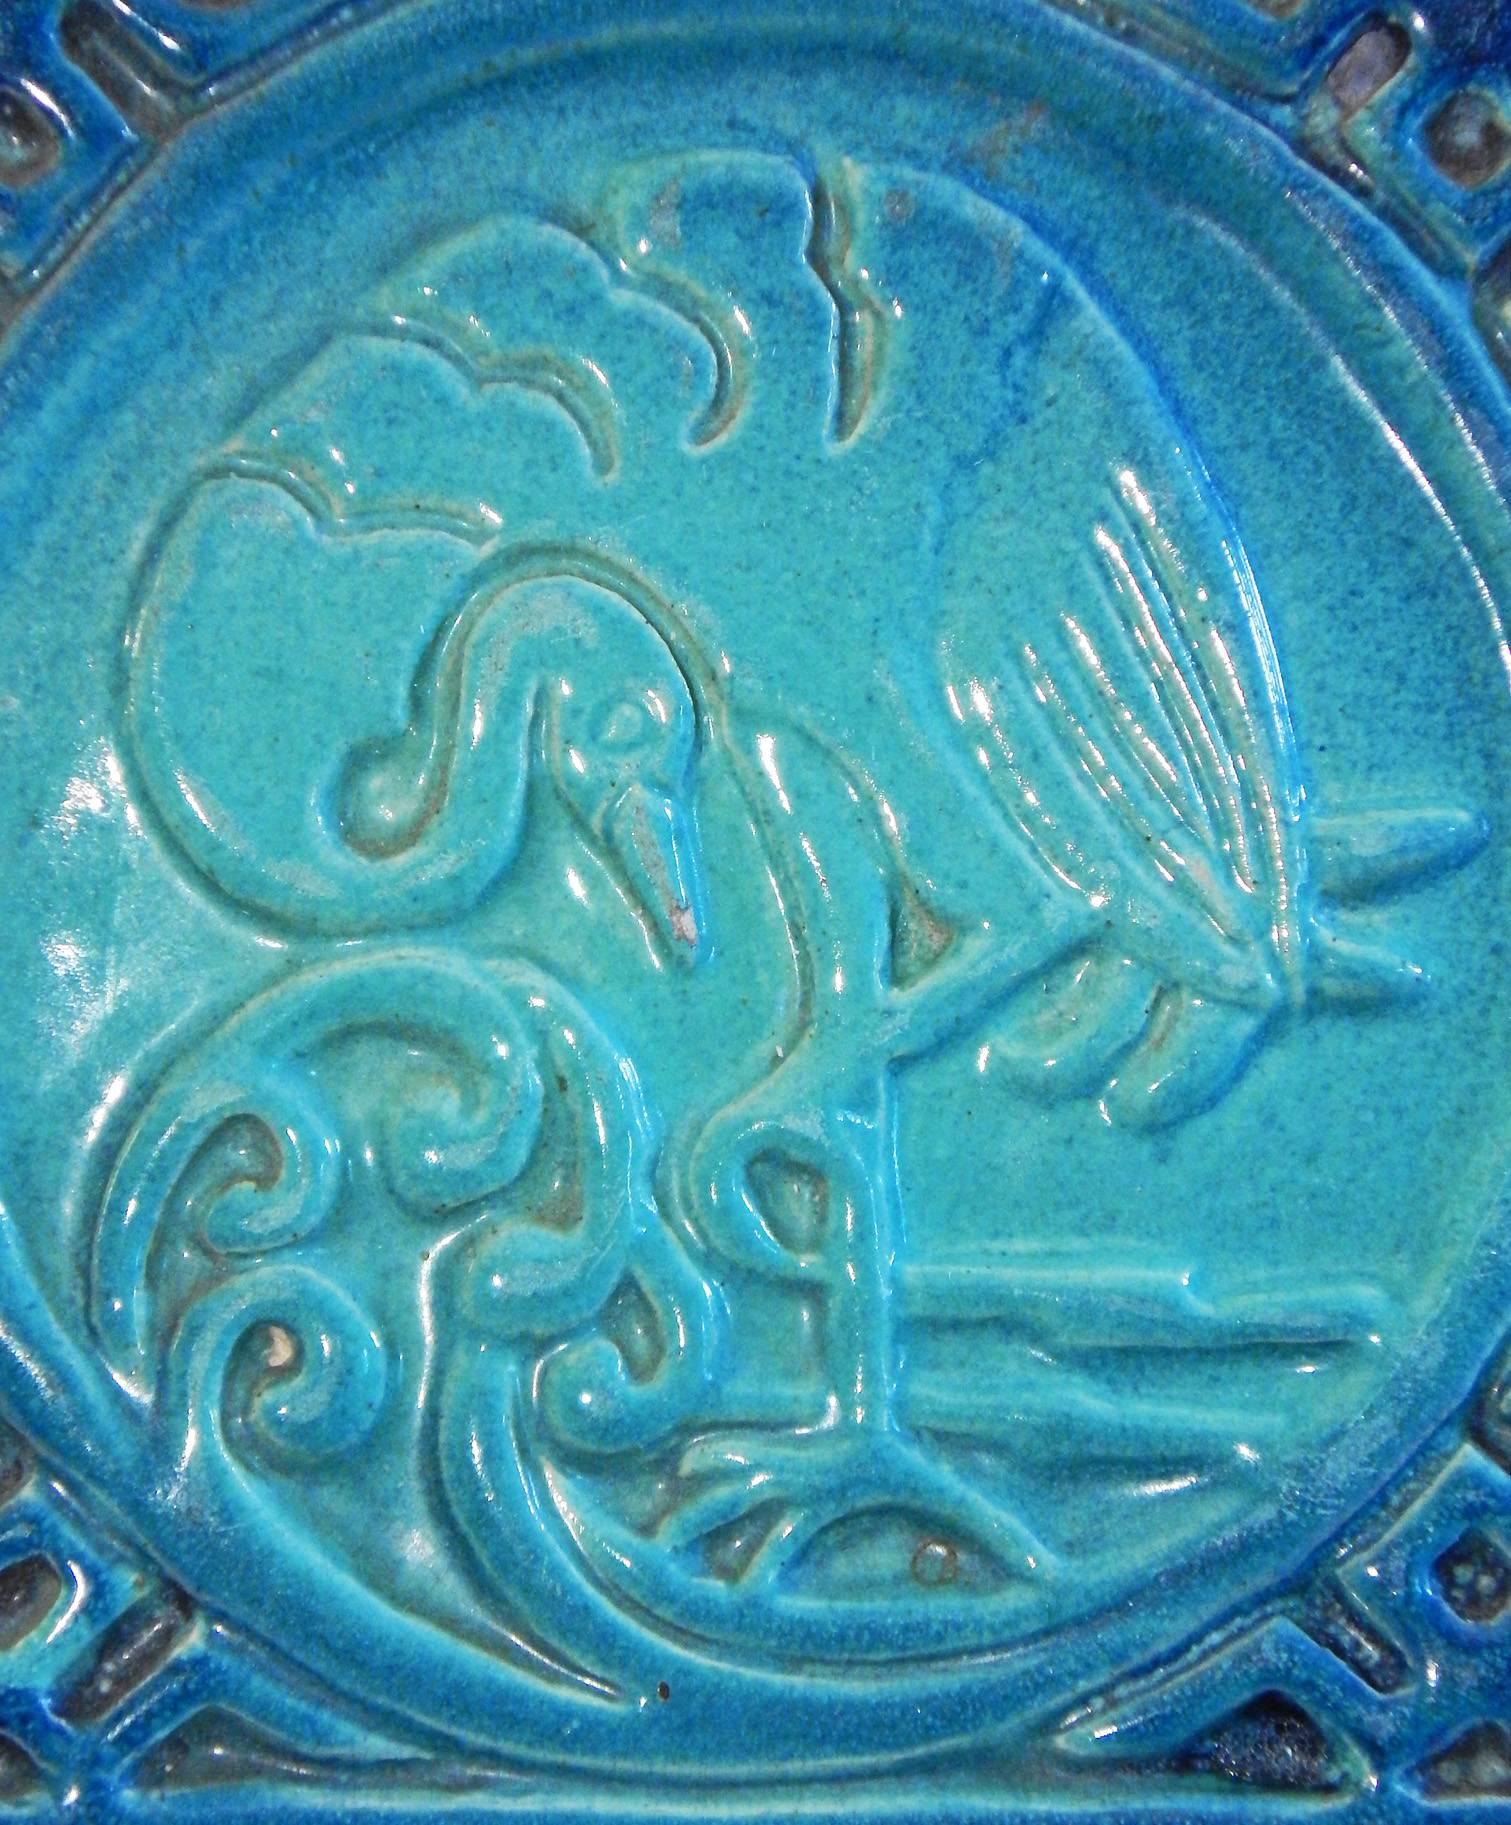 A fabulous mashup of Art Deco and 20th century chinoiserie, this rare and vivid tile, in shades of turquoise and cerulean, was made by Lulu Scott Backus in Rochester, New York. Backus had studied under the famous Charles Binns, who established